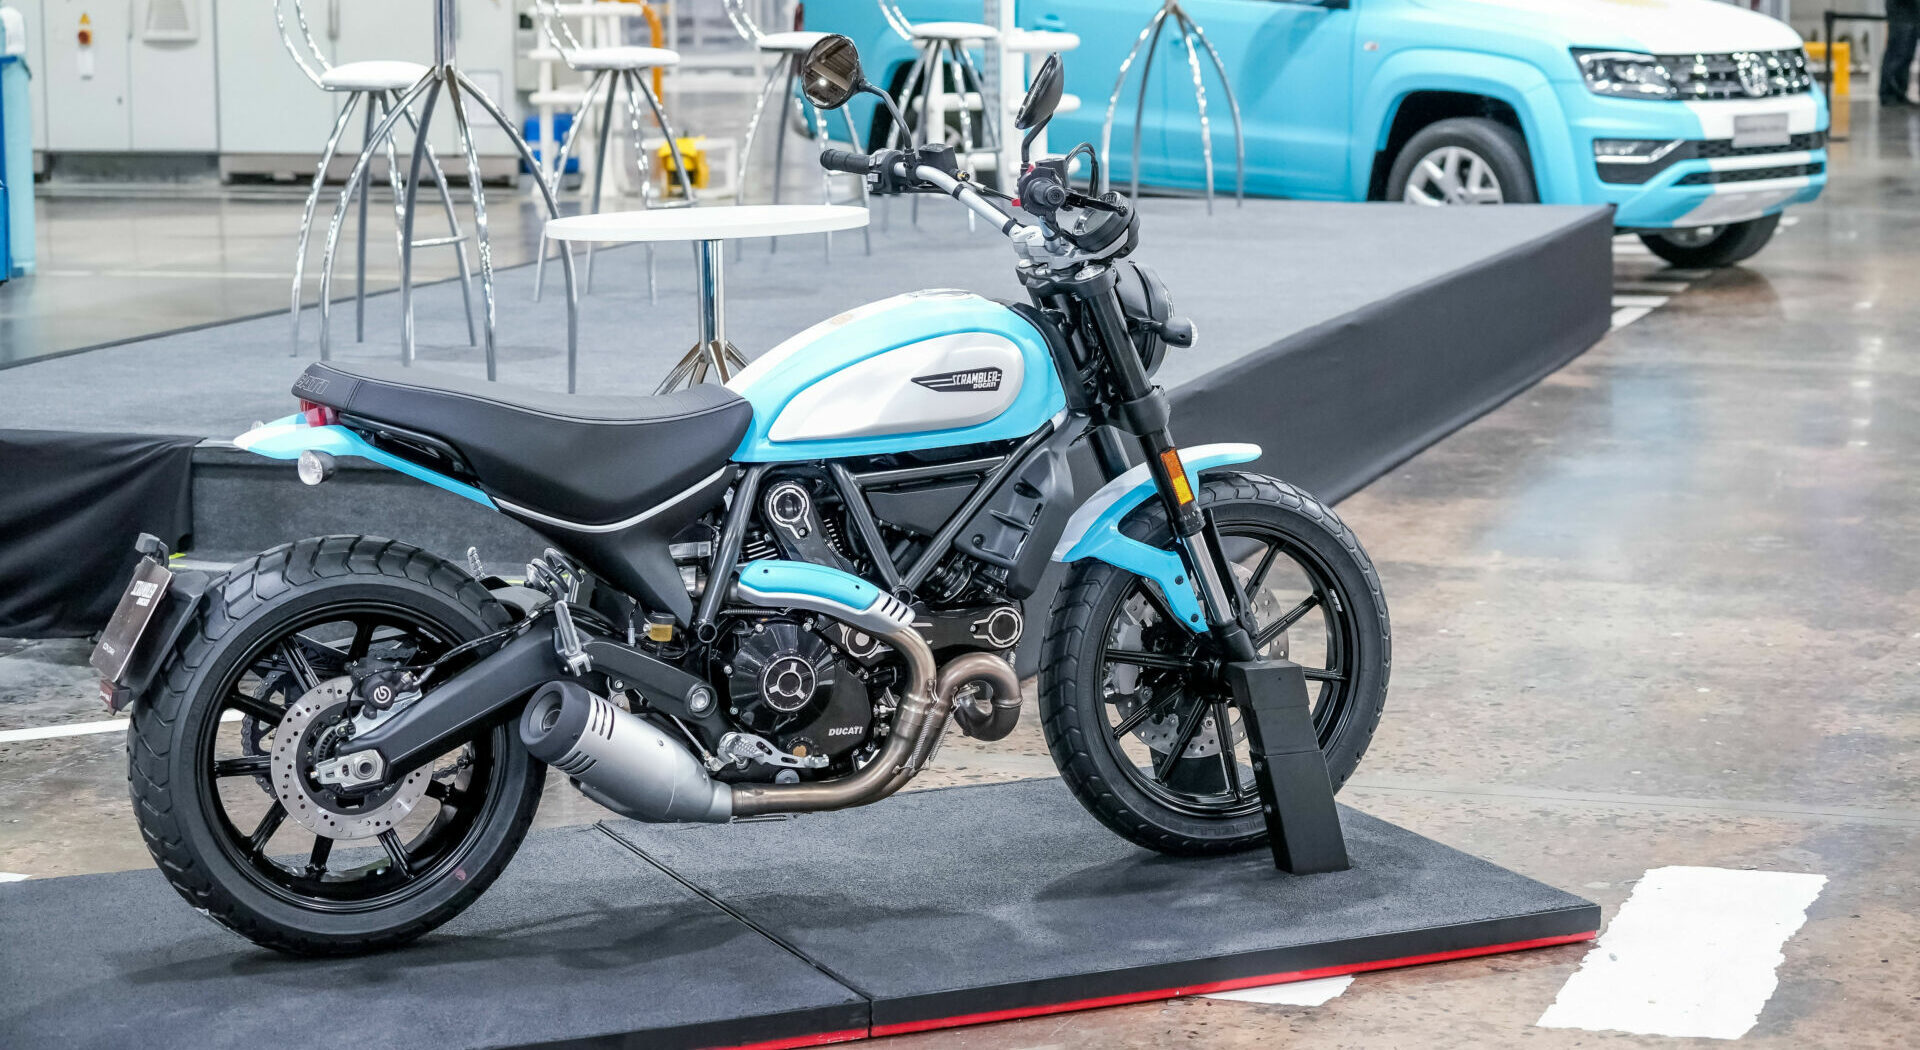 A Ducati Scrambler Icon customized with colors from the Argentinian flag. Photo courtesy Ducati.